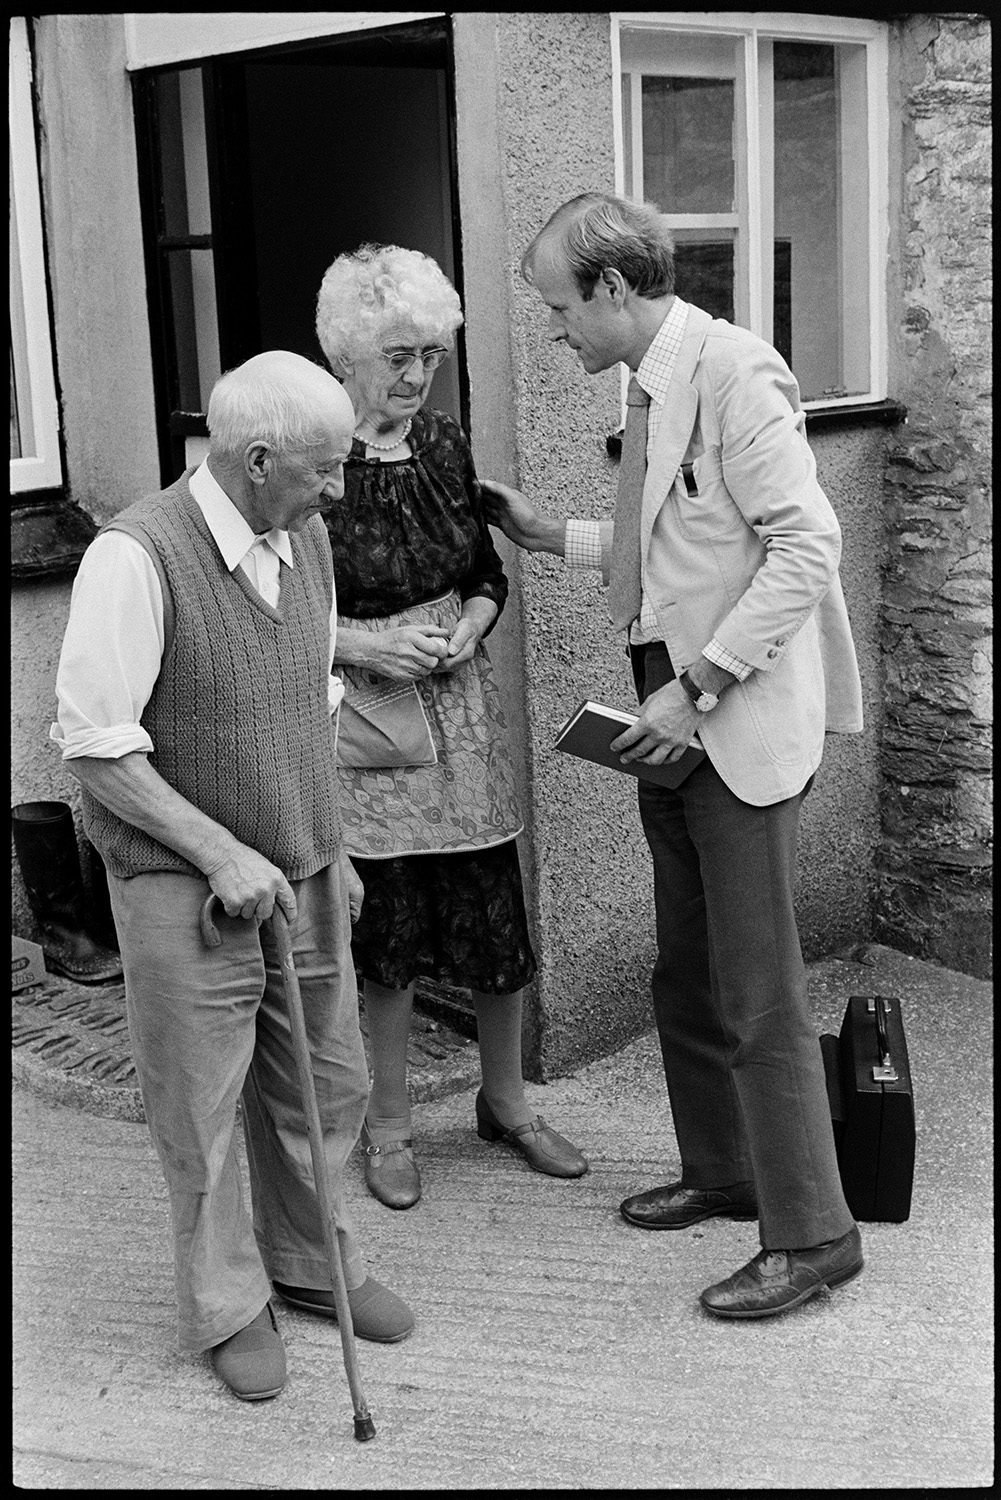 Doctor talking to elderly man and woman on his rounds.
[Doctor Richard Westcott talking to a man and woman outside their home while on his rounds. His case is on the ground behind him and he is holding a notebook.]